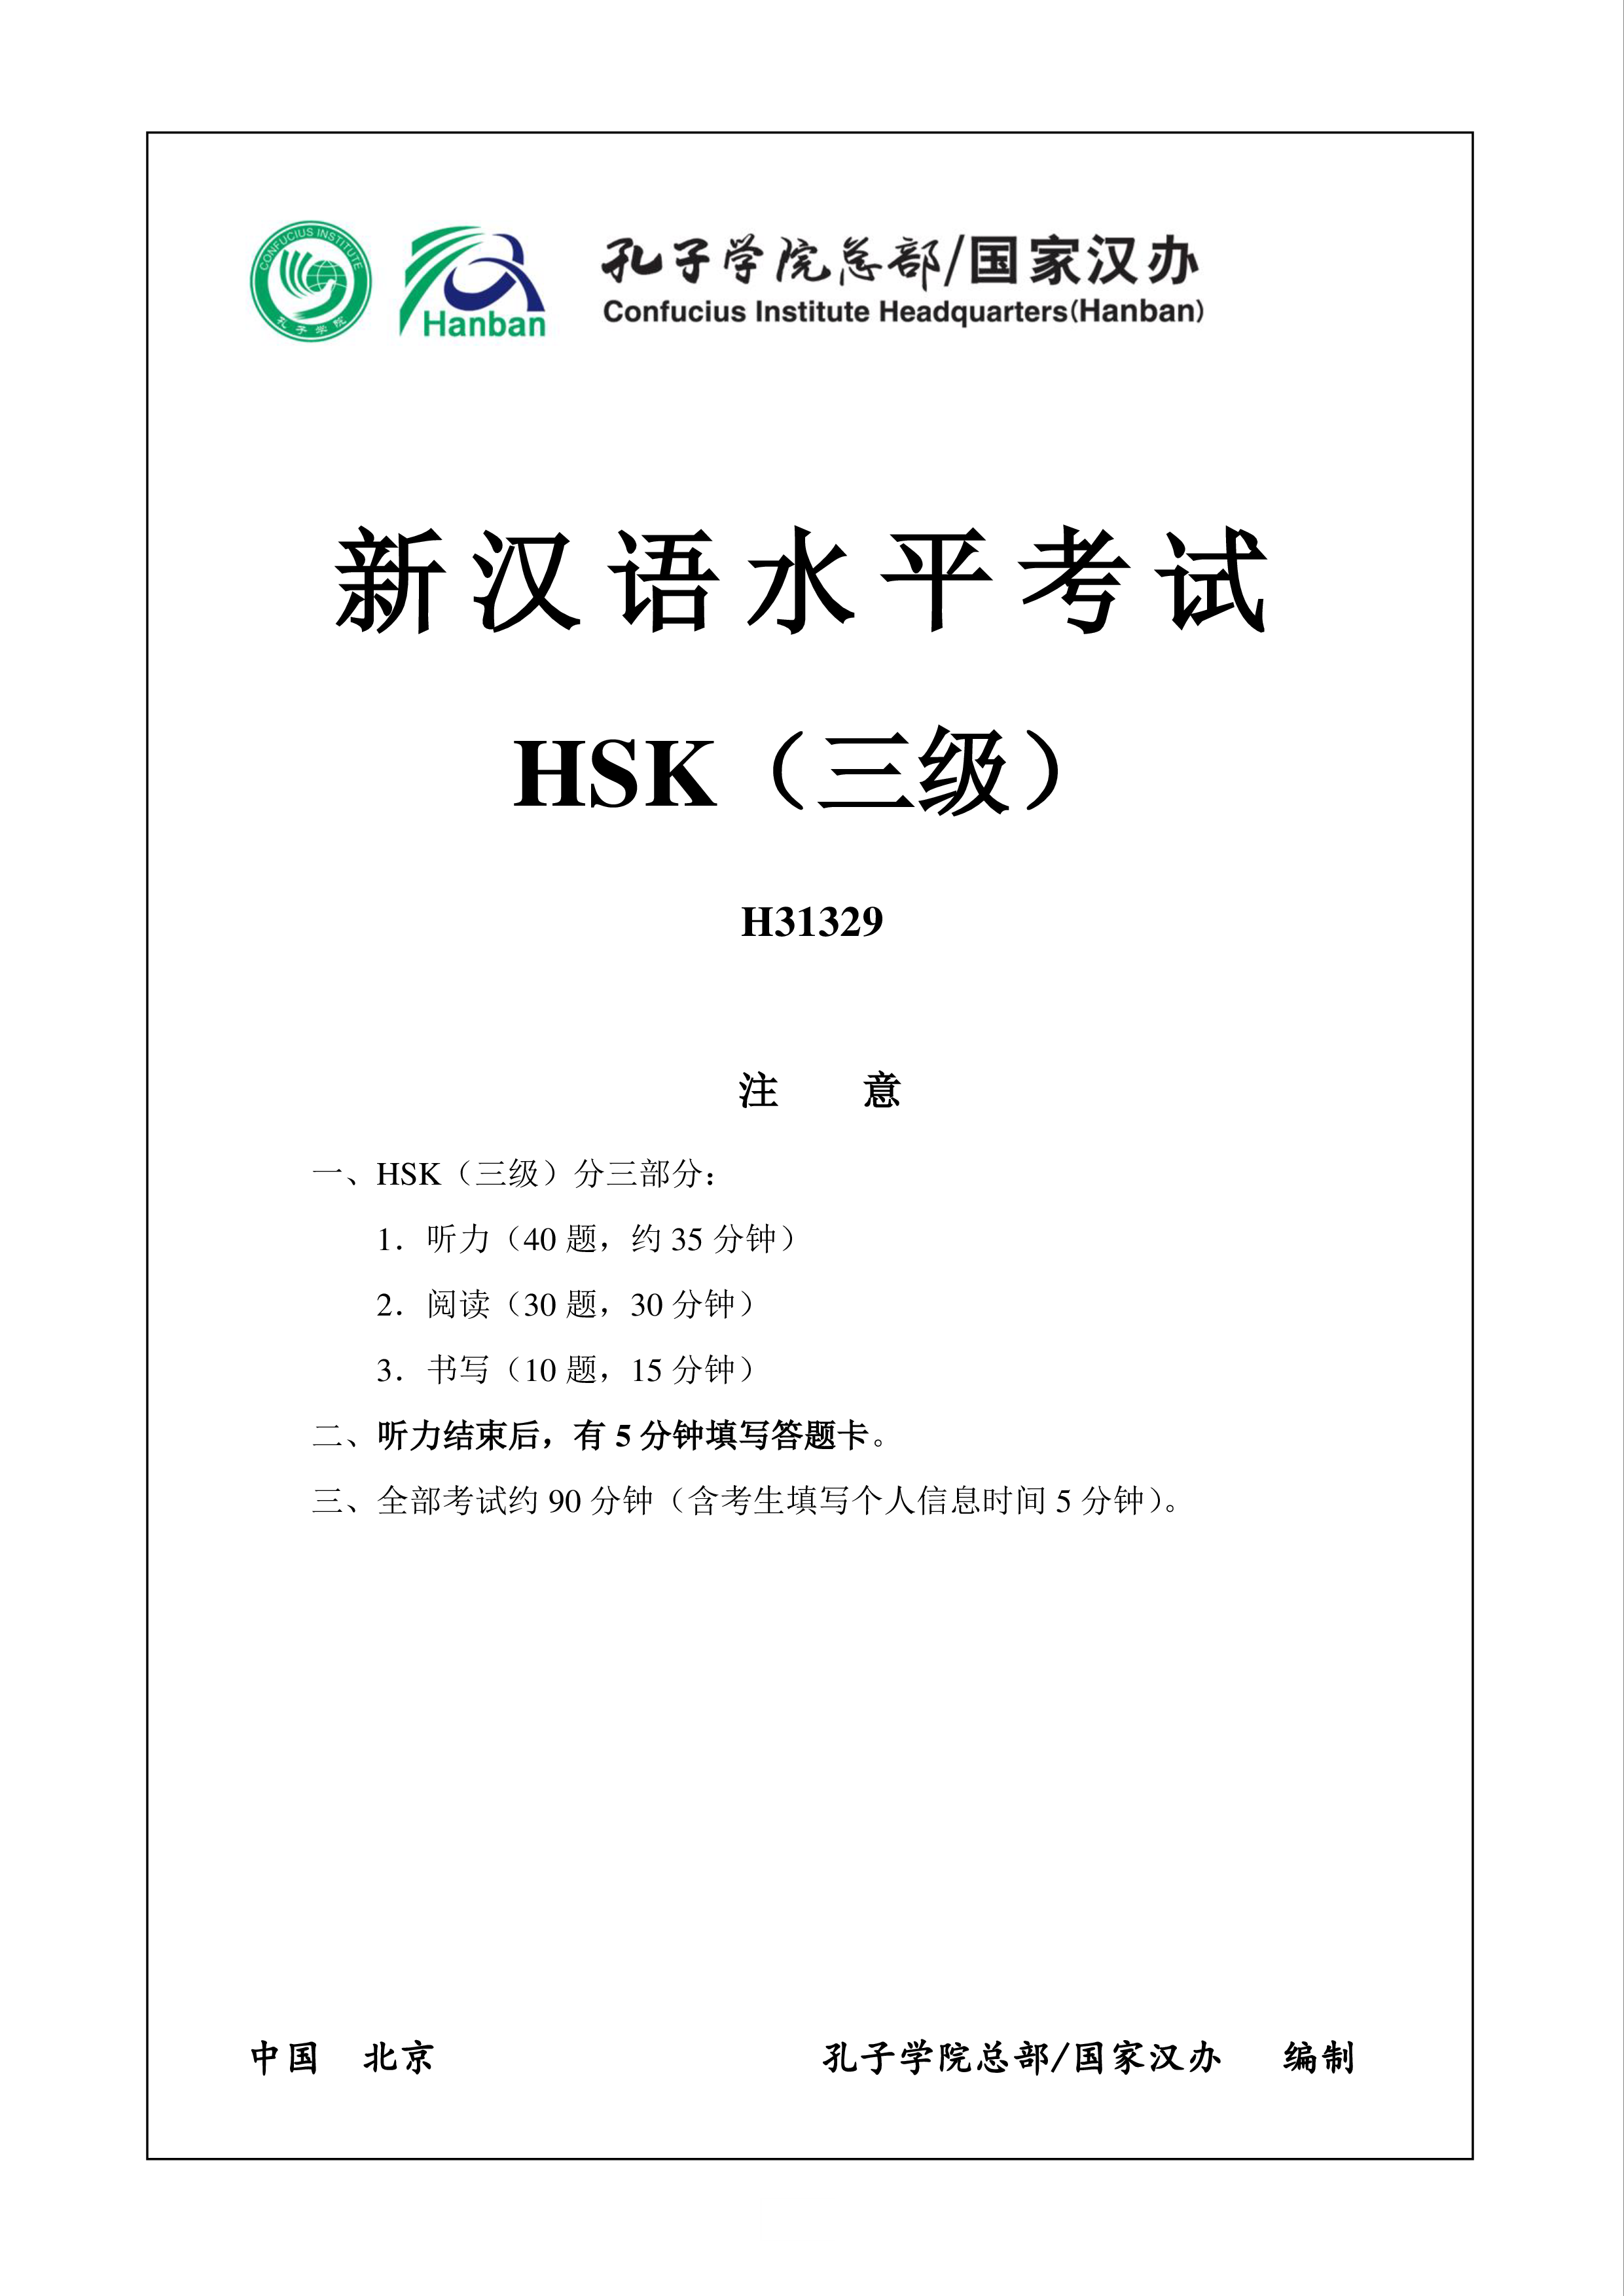 hsk3 chinese exam including answers # h31329 plantilla imagen principal